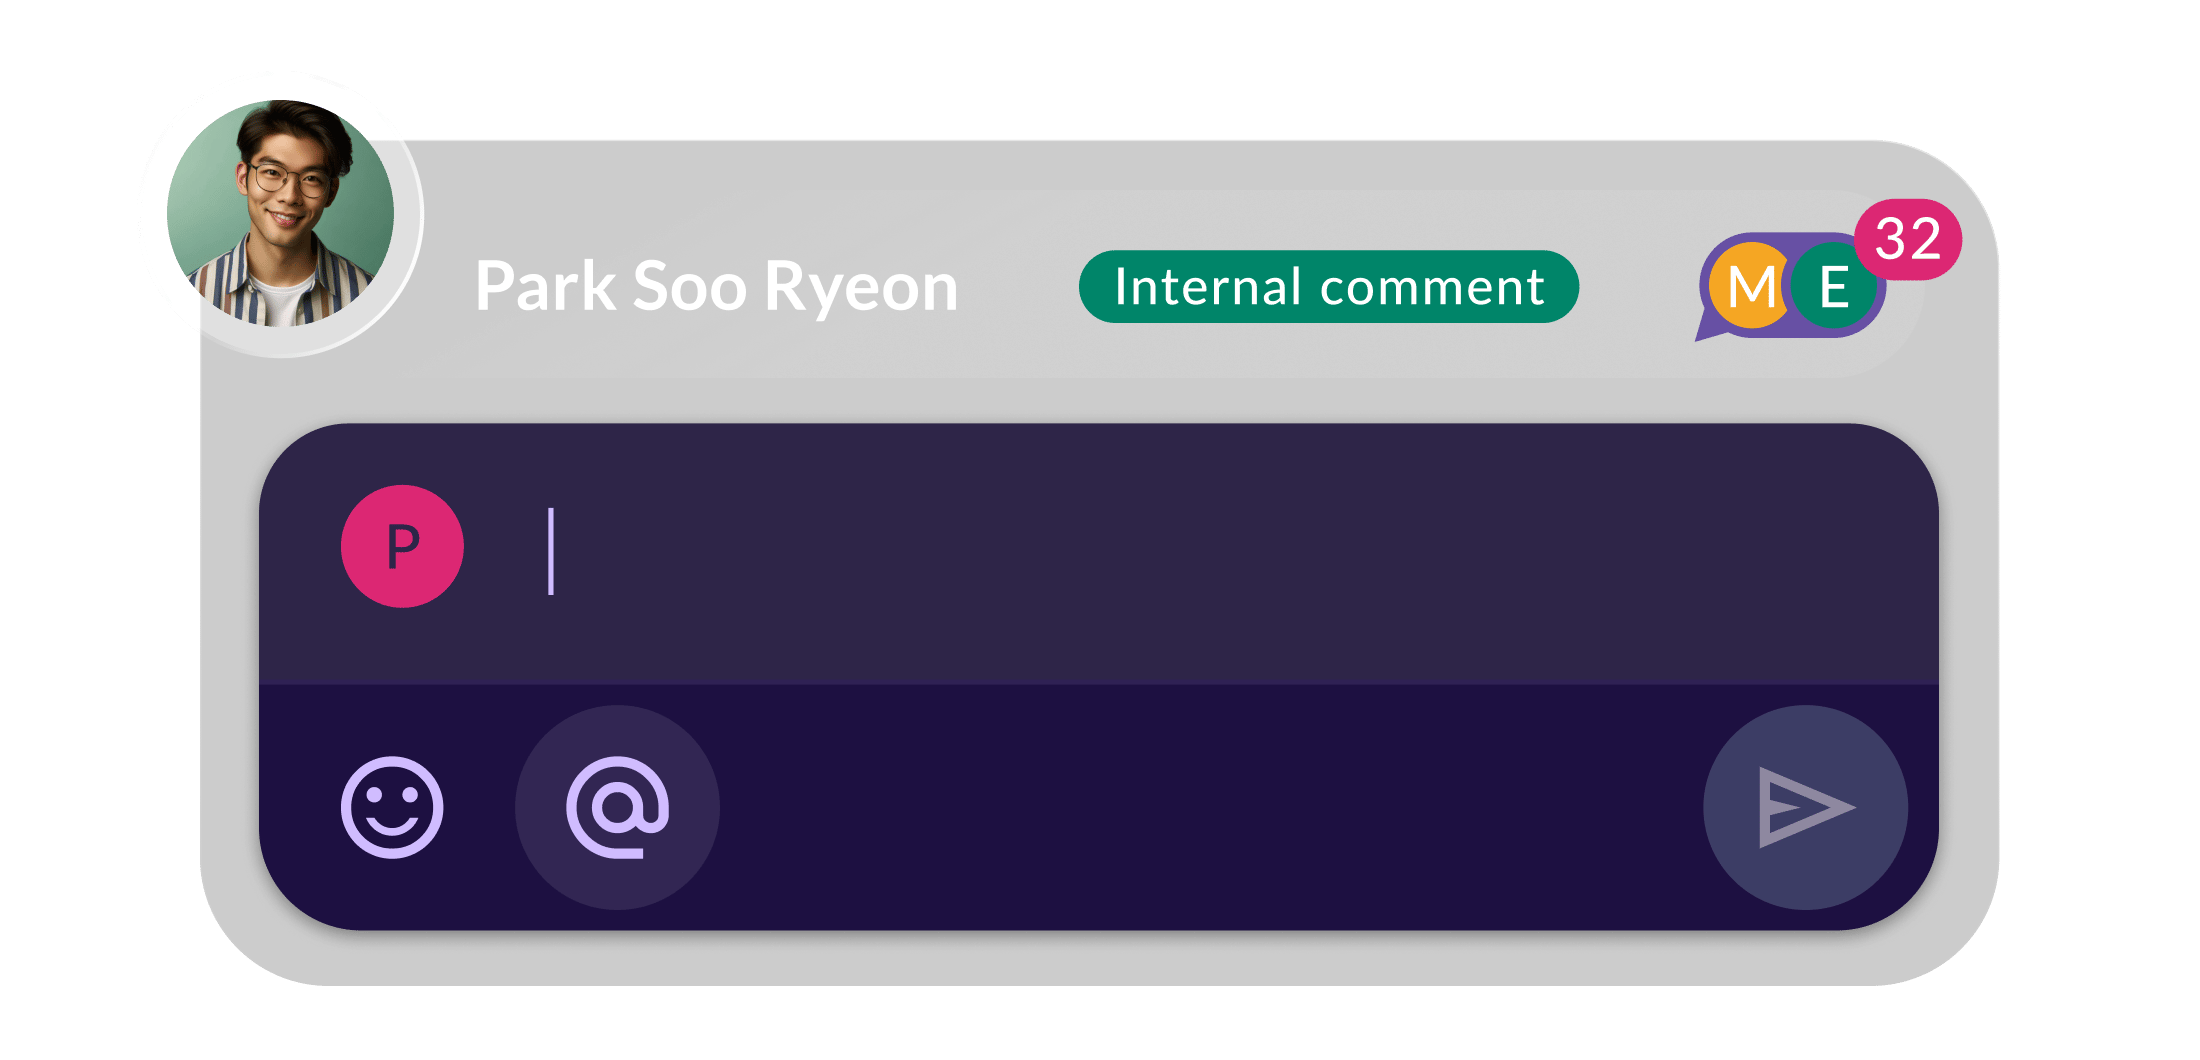 An empty comment box, showing the ability to tag users